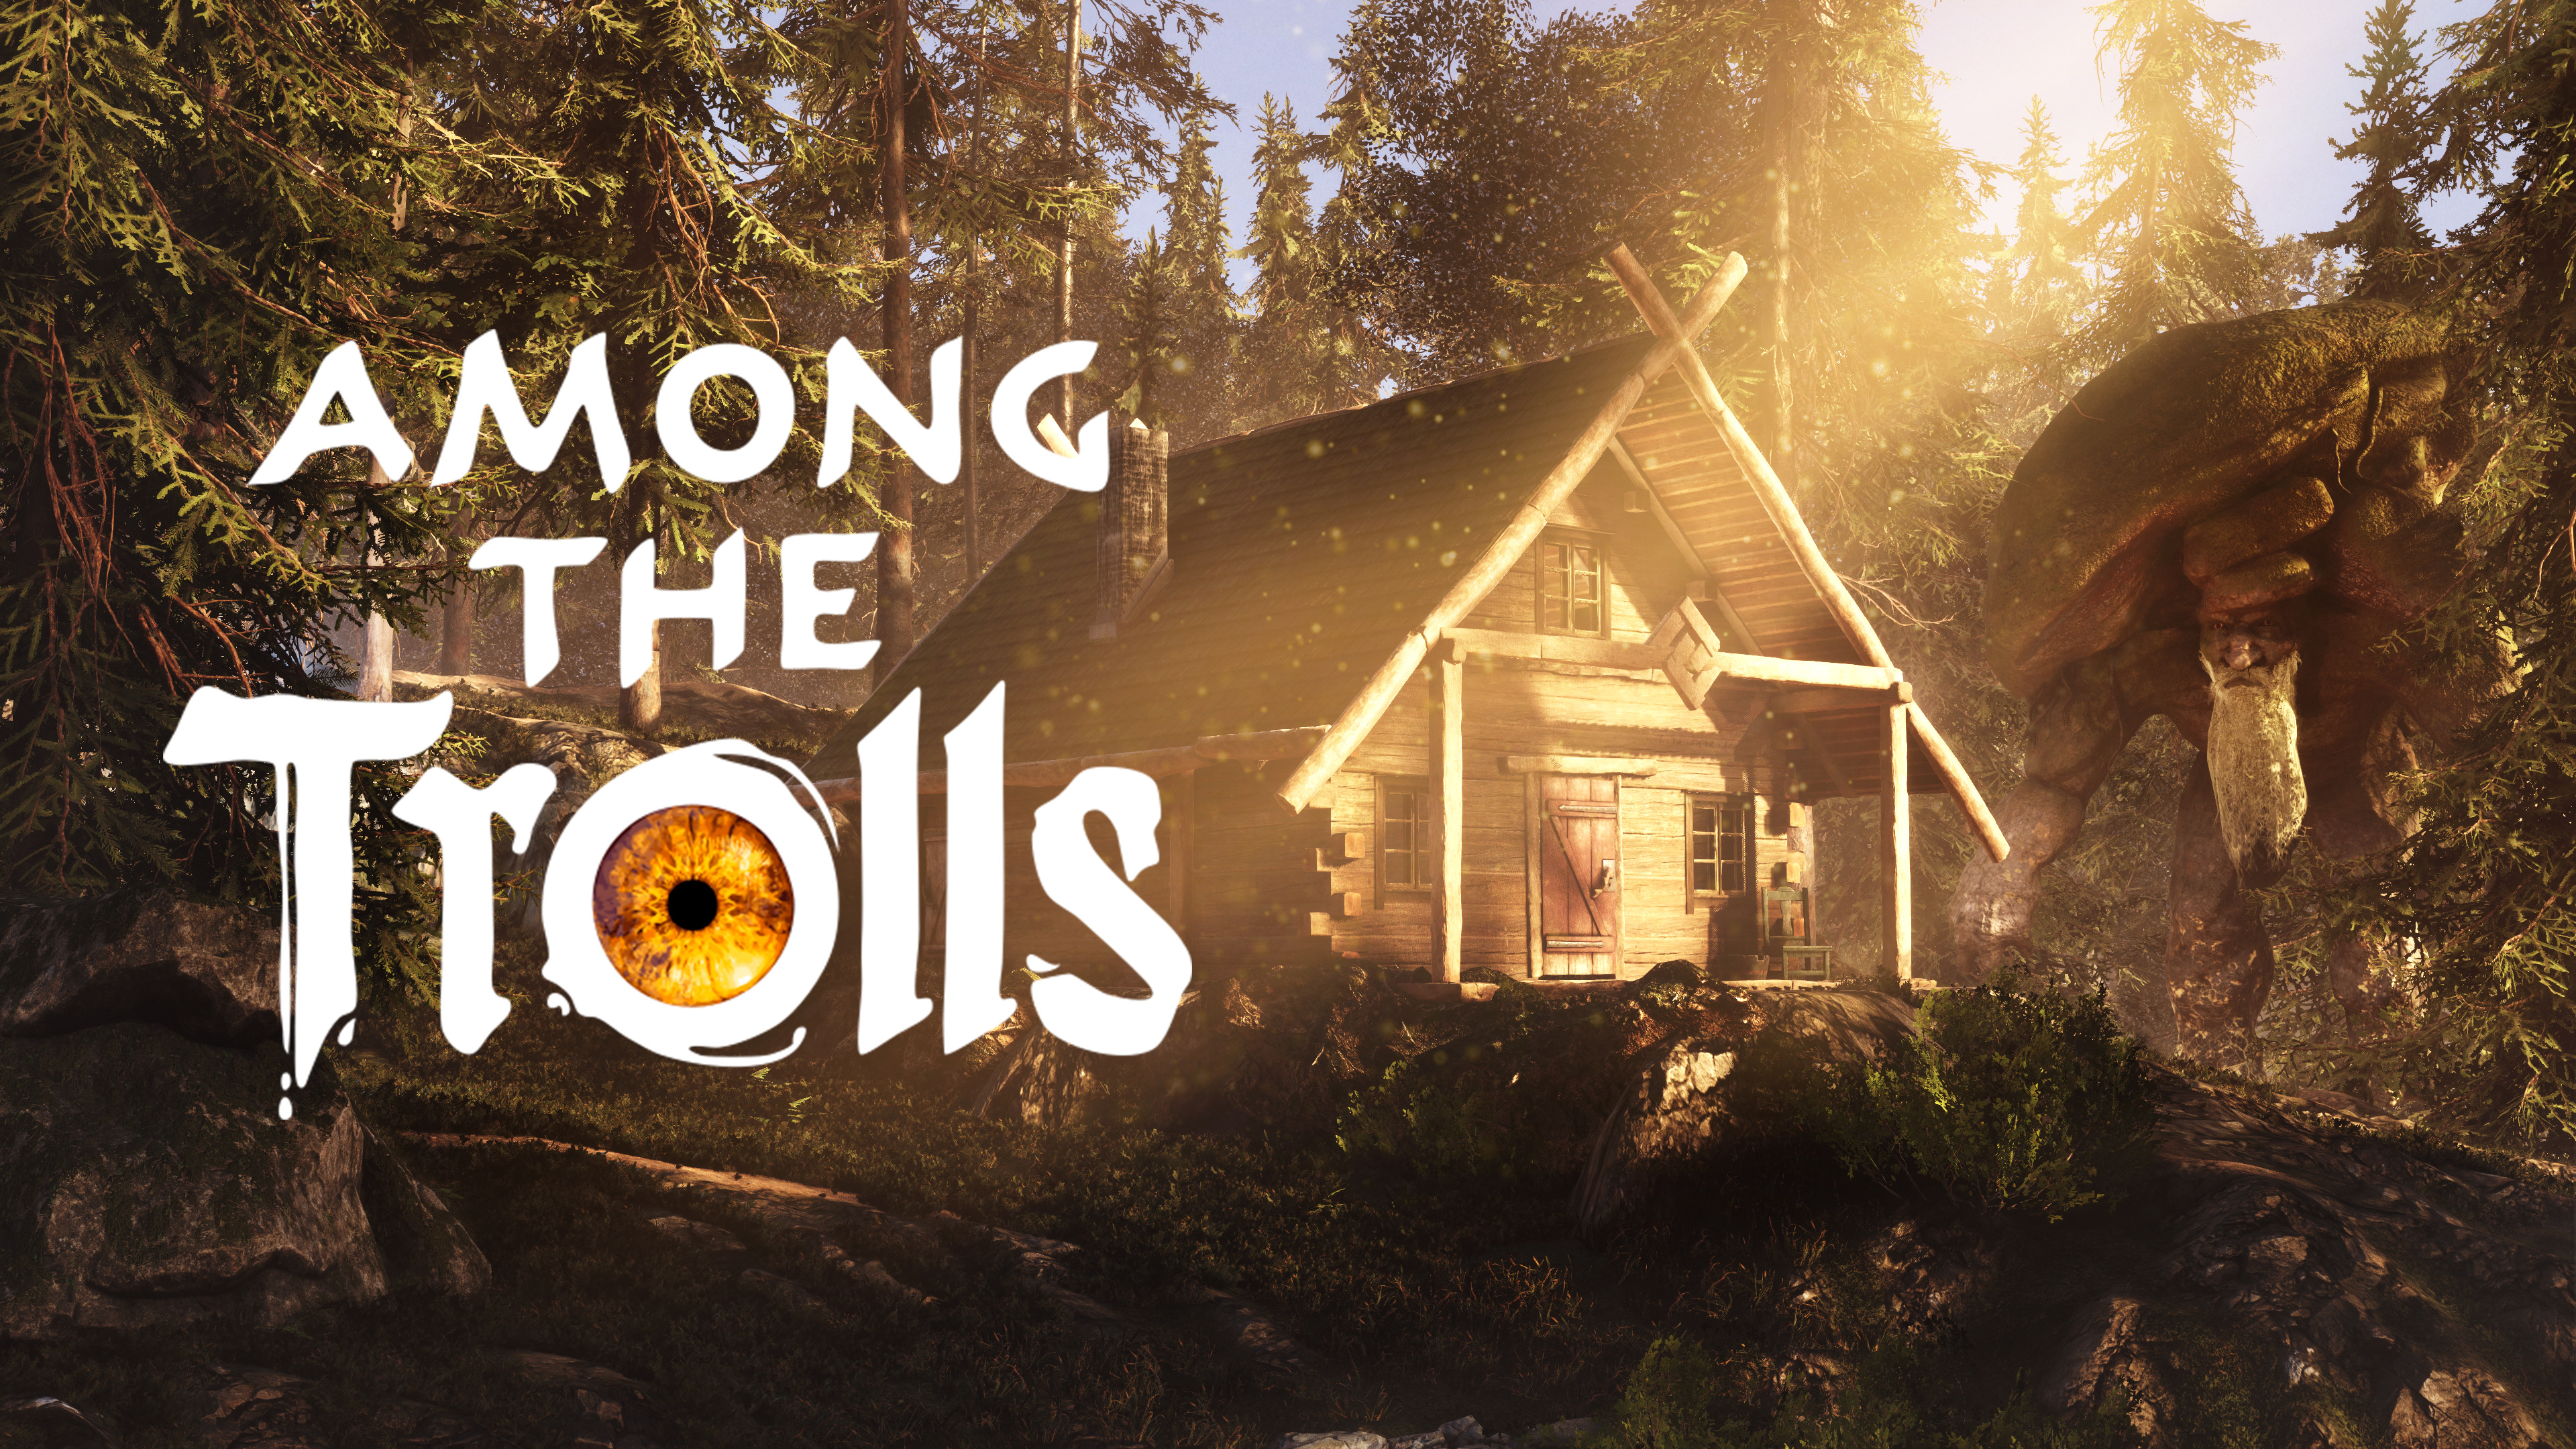 Action Adventure Game (Gaming), Trolls game announced, PC gaming, First-person survival, 3840x2160 4K Desktop